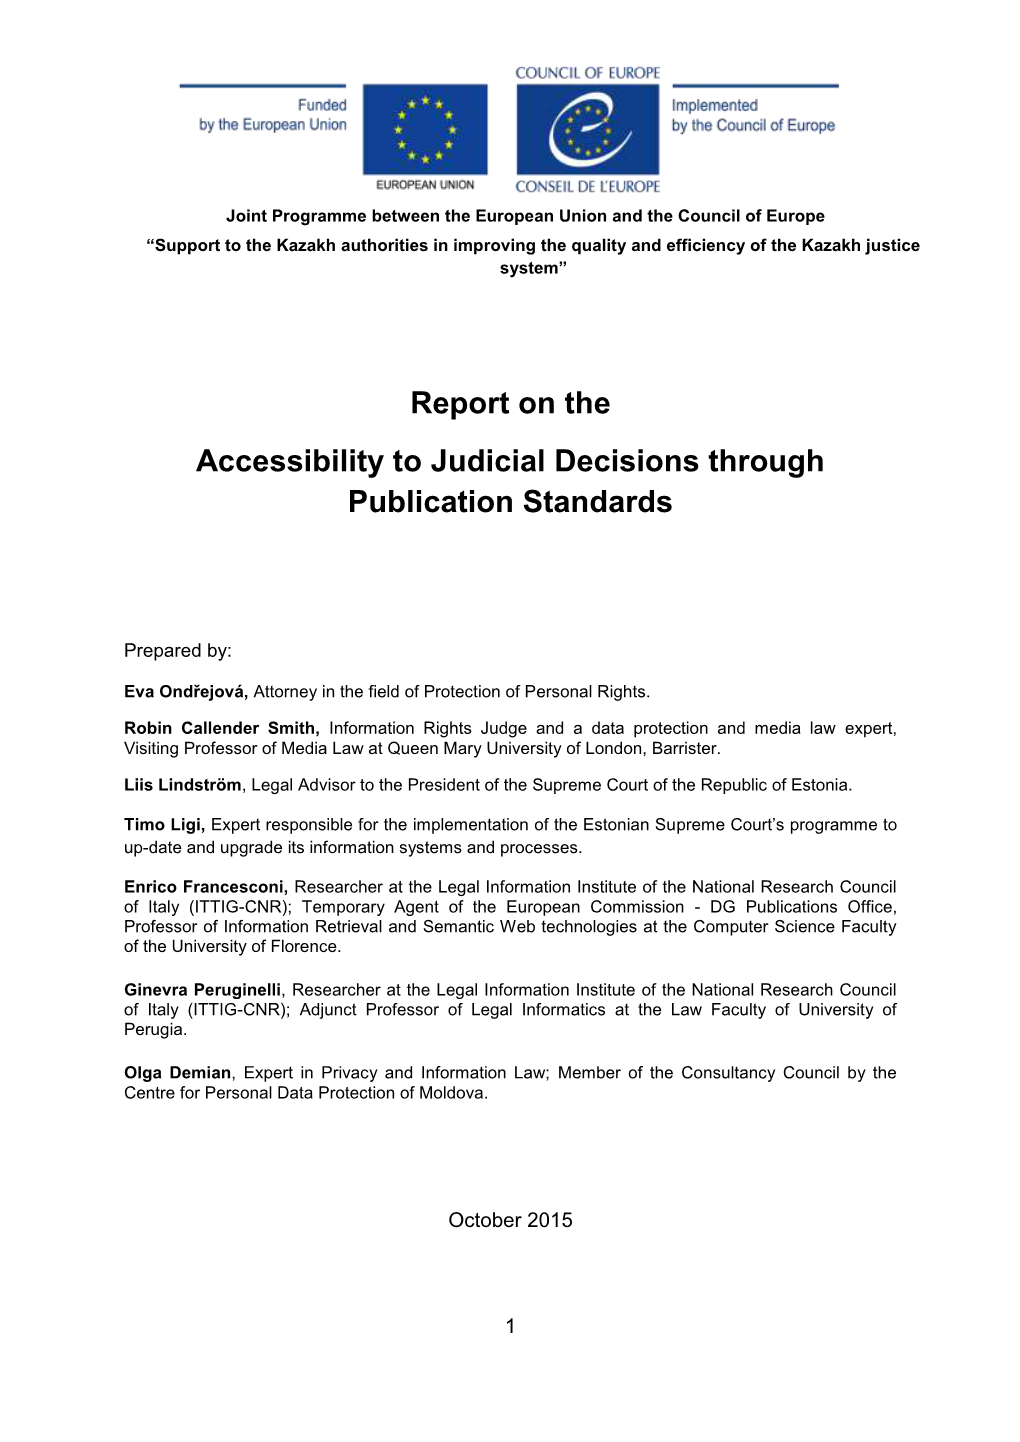 Report on the Accessibility to Judicial Decisions Through Publication Standards